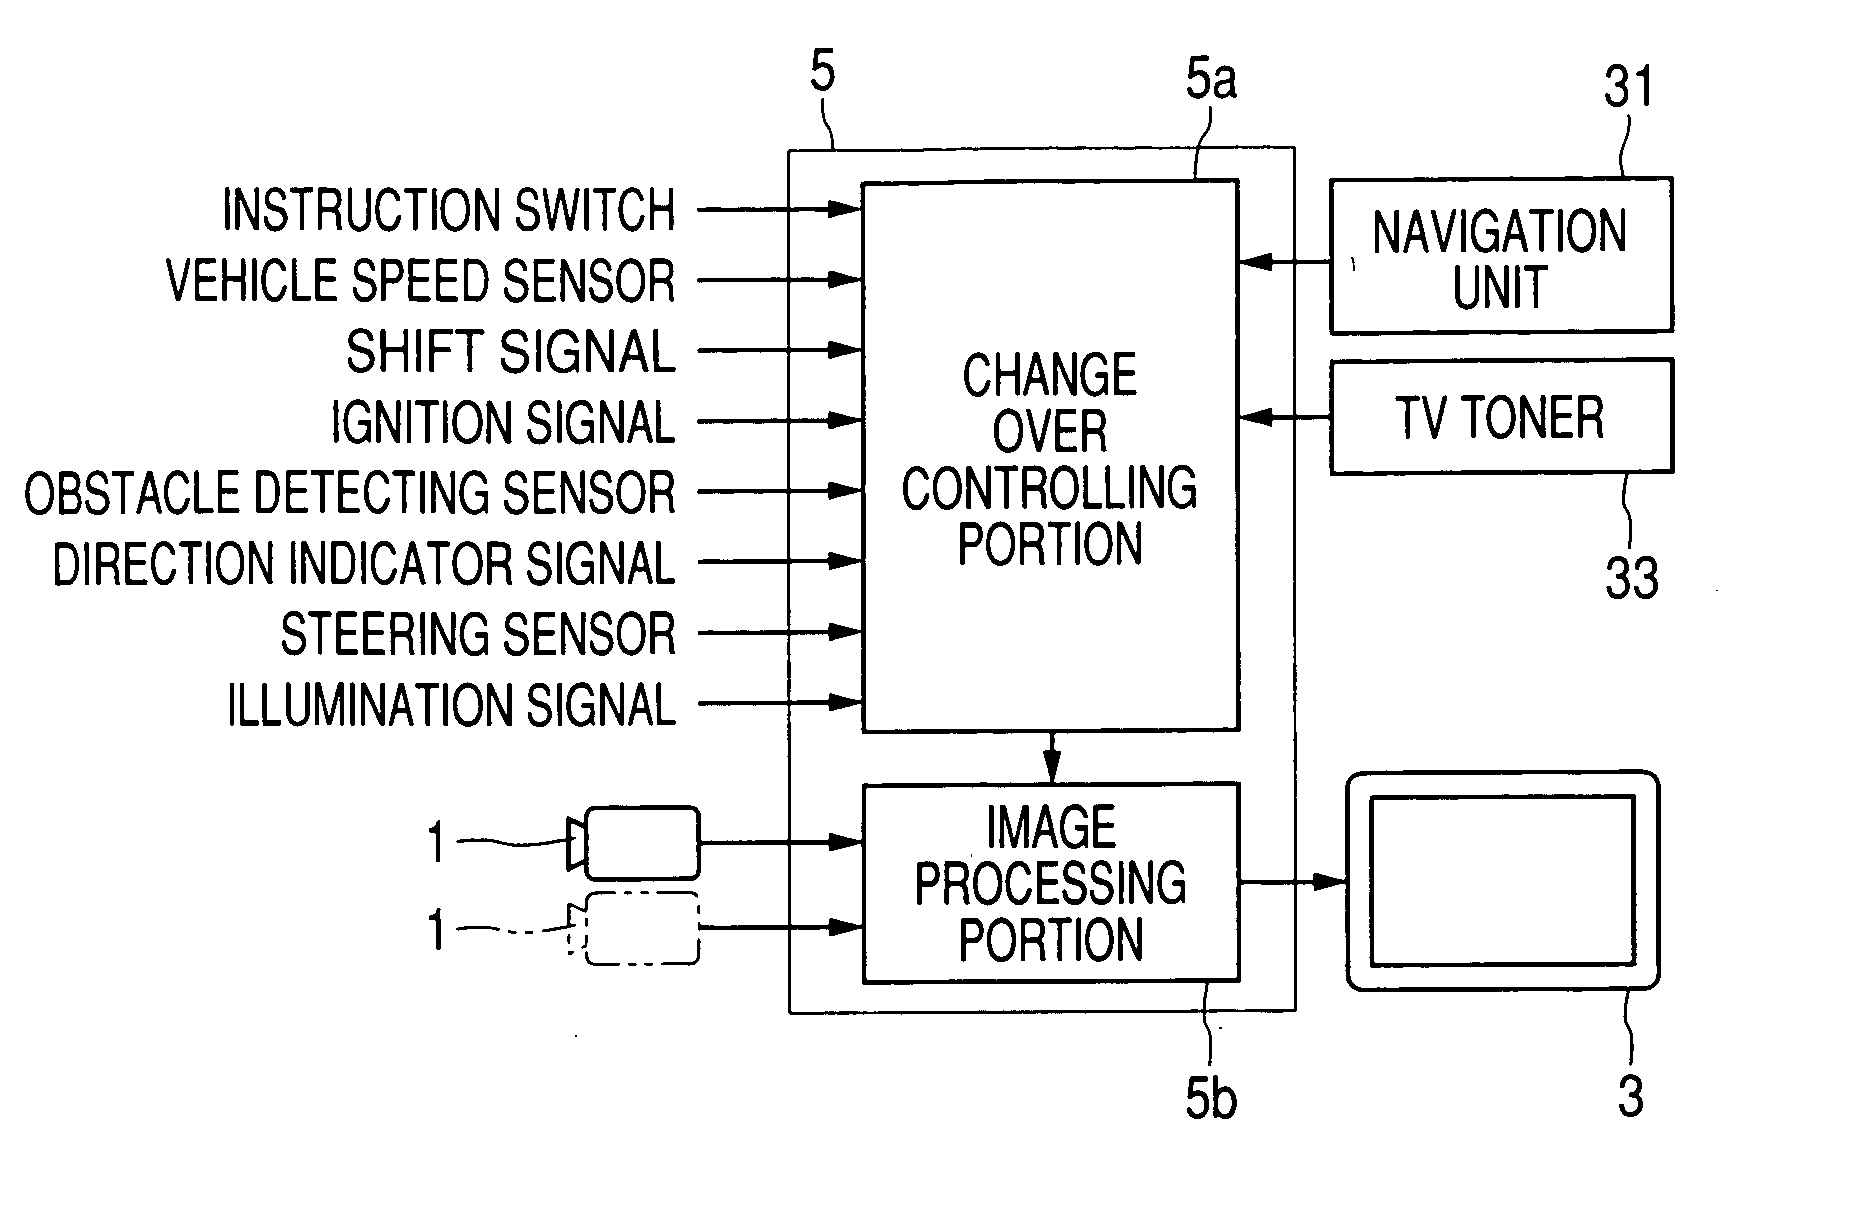 Camera unit and apparatus for monitoring vehicle periphery